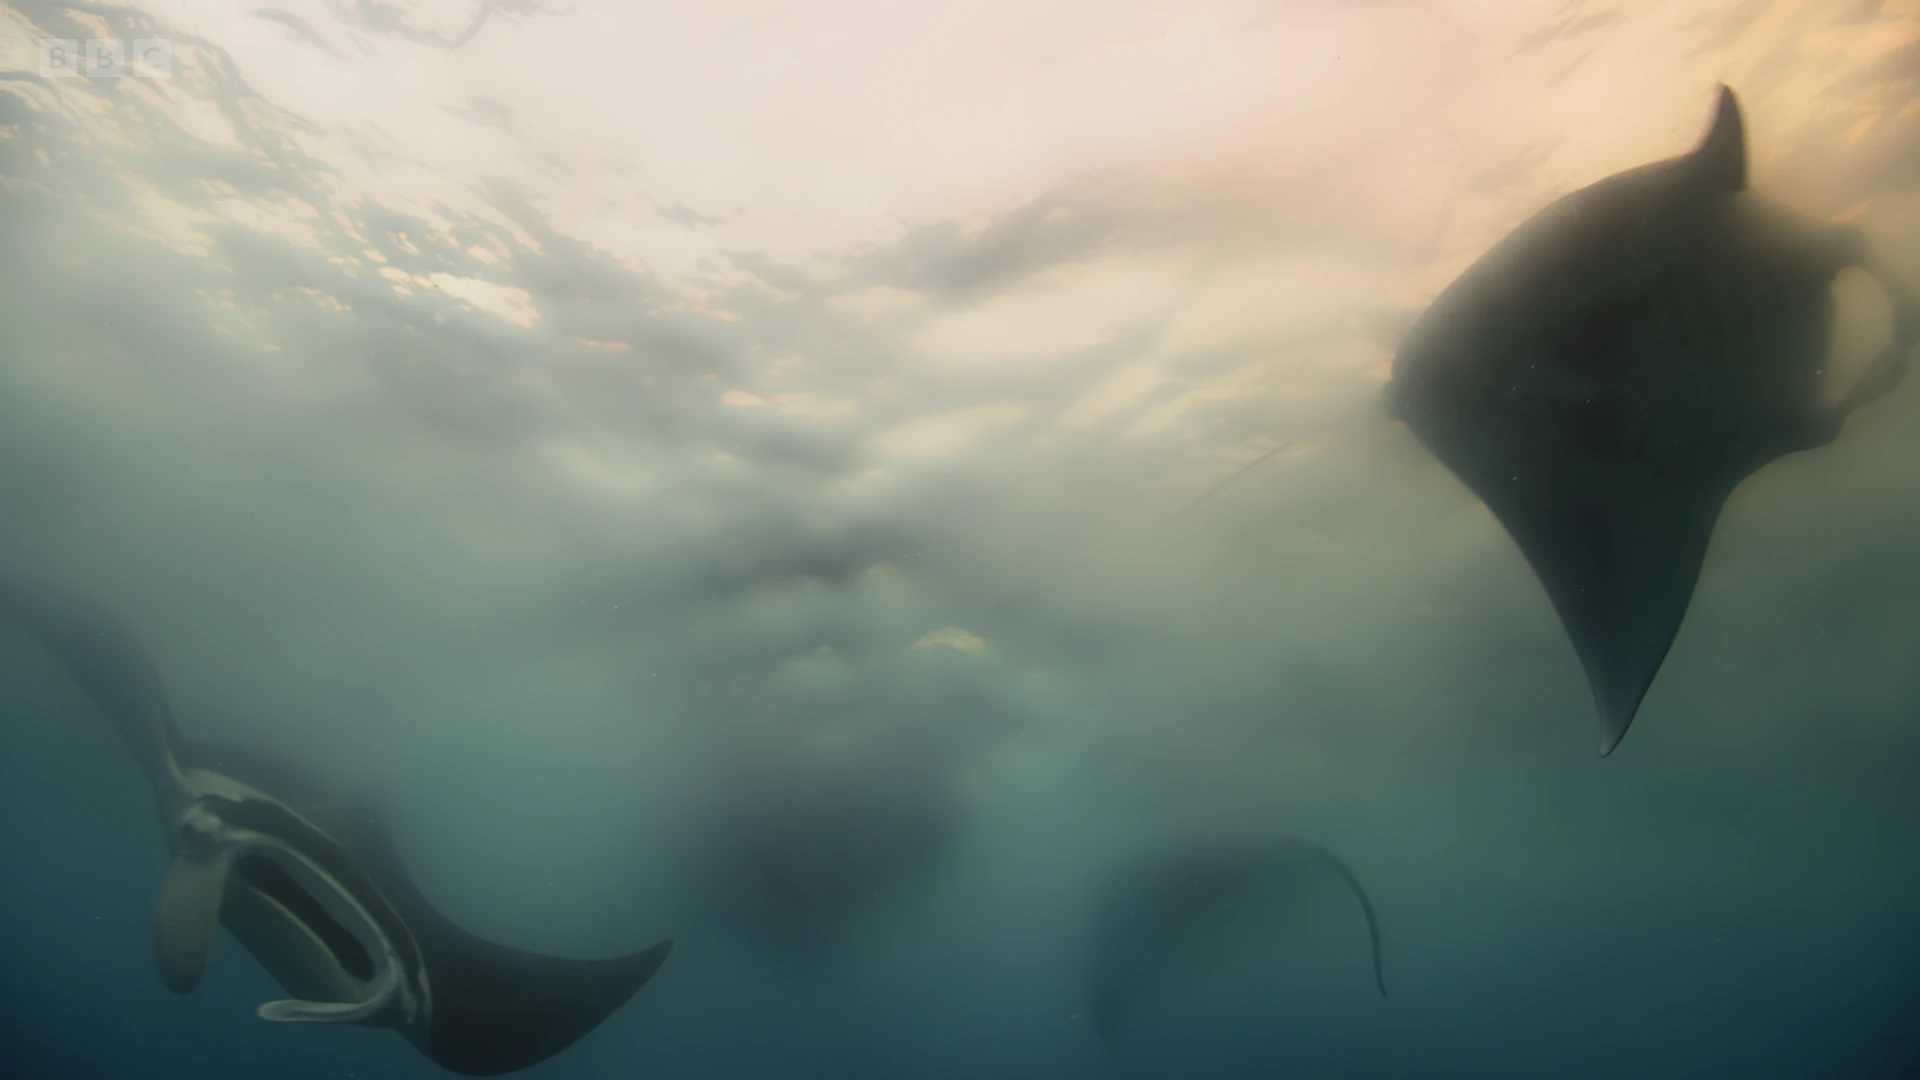 Reef manta ray (Mobula alfredi) as shown in A Perfect Planet - Oceans